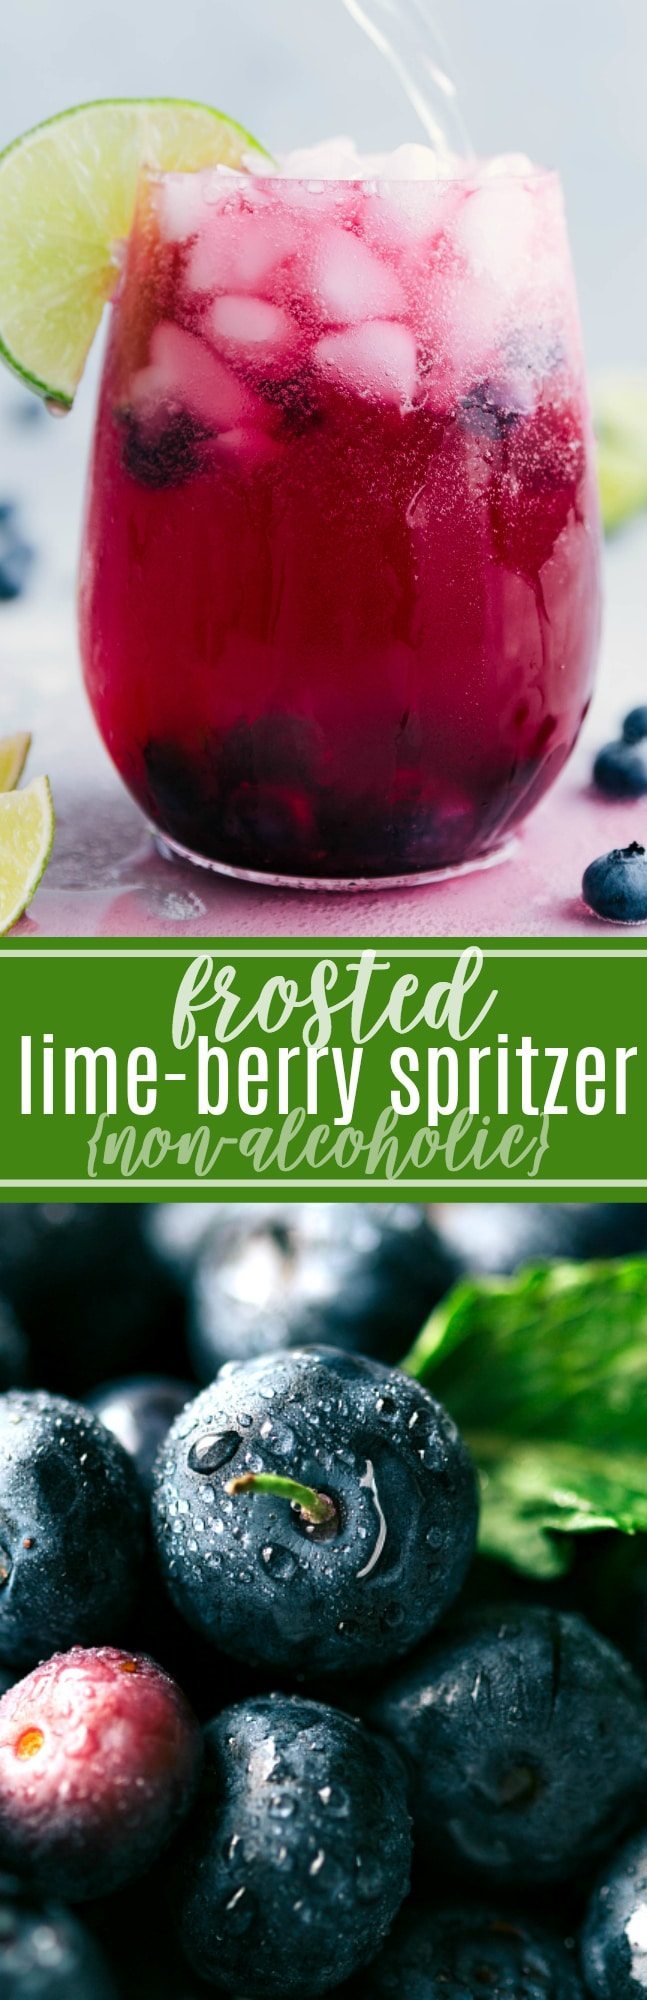 A delicious blueberry mandarine-lime beverage. This spritzer is non-alcoholic made with a sugared blueberry base and a mandarine-lime sparkling water. chelseasmessyapron.com